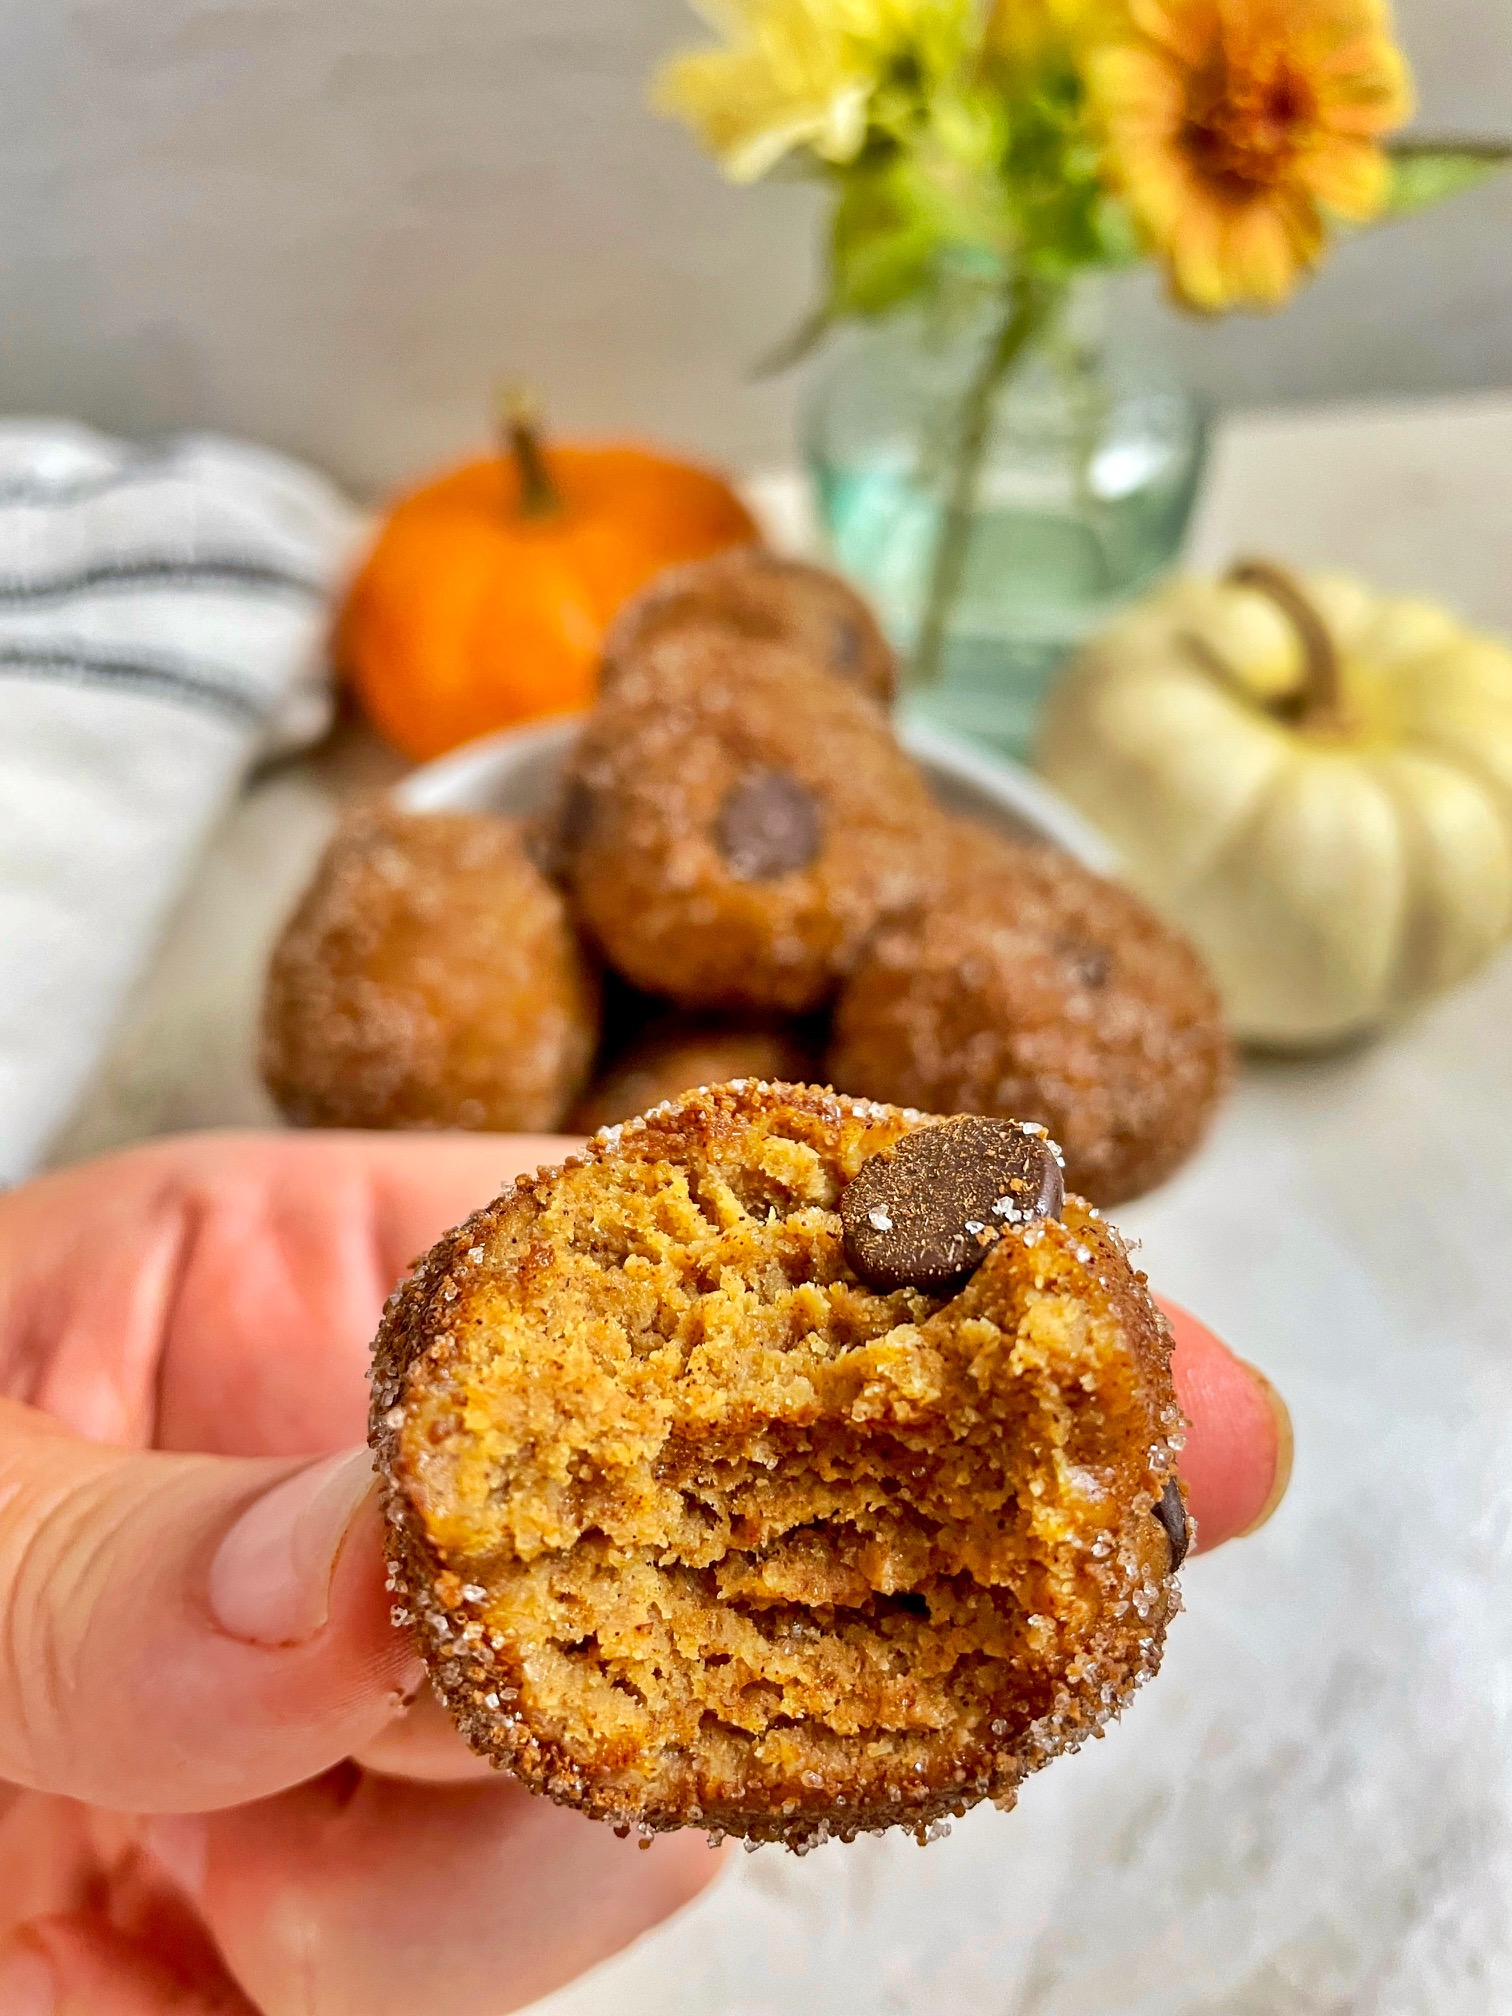 a pumpkin cookie dough bite coated with cinnamon sugar with a bite taken out of it to show the texture inside